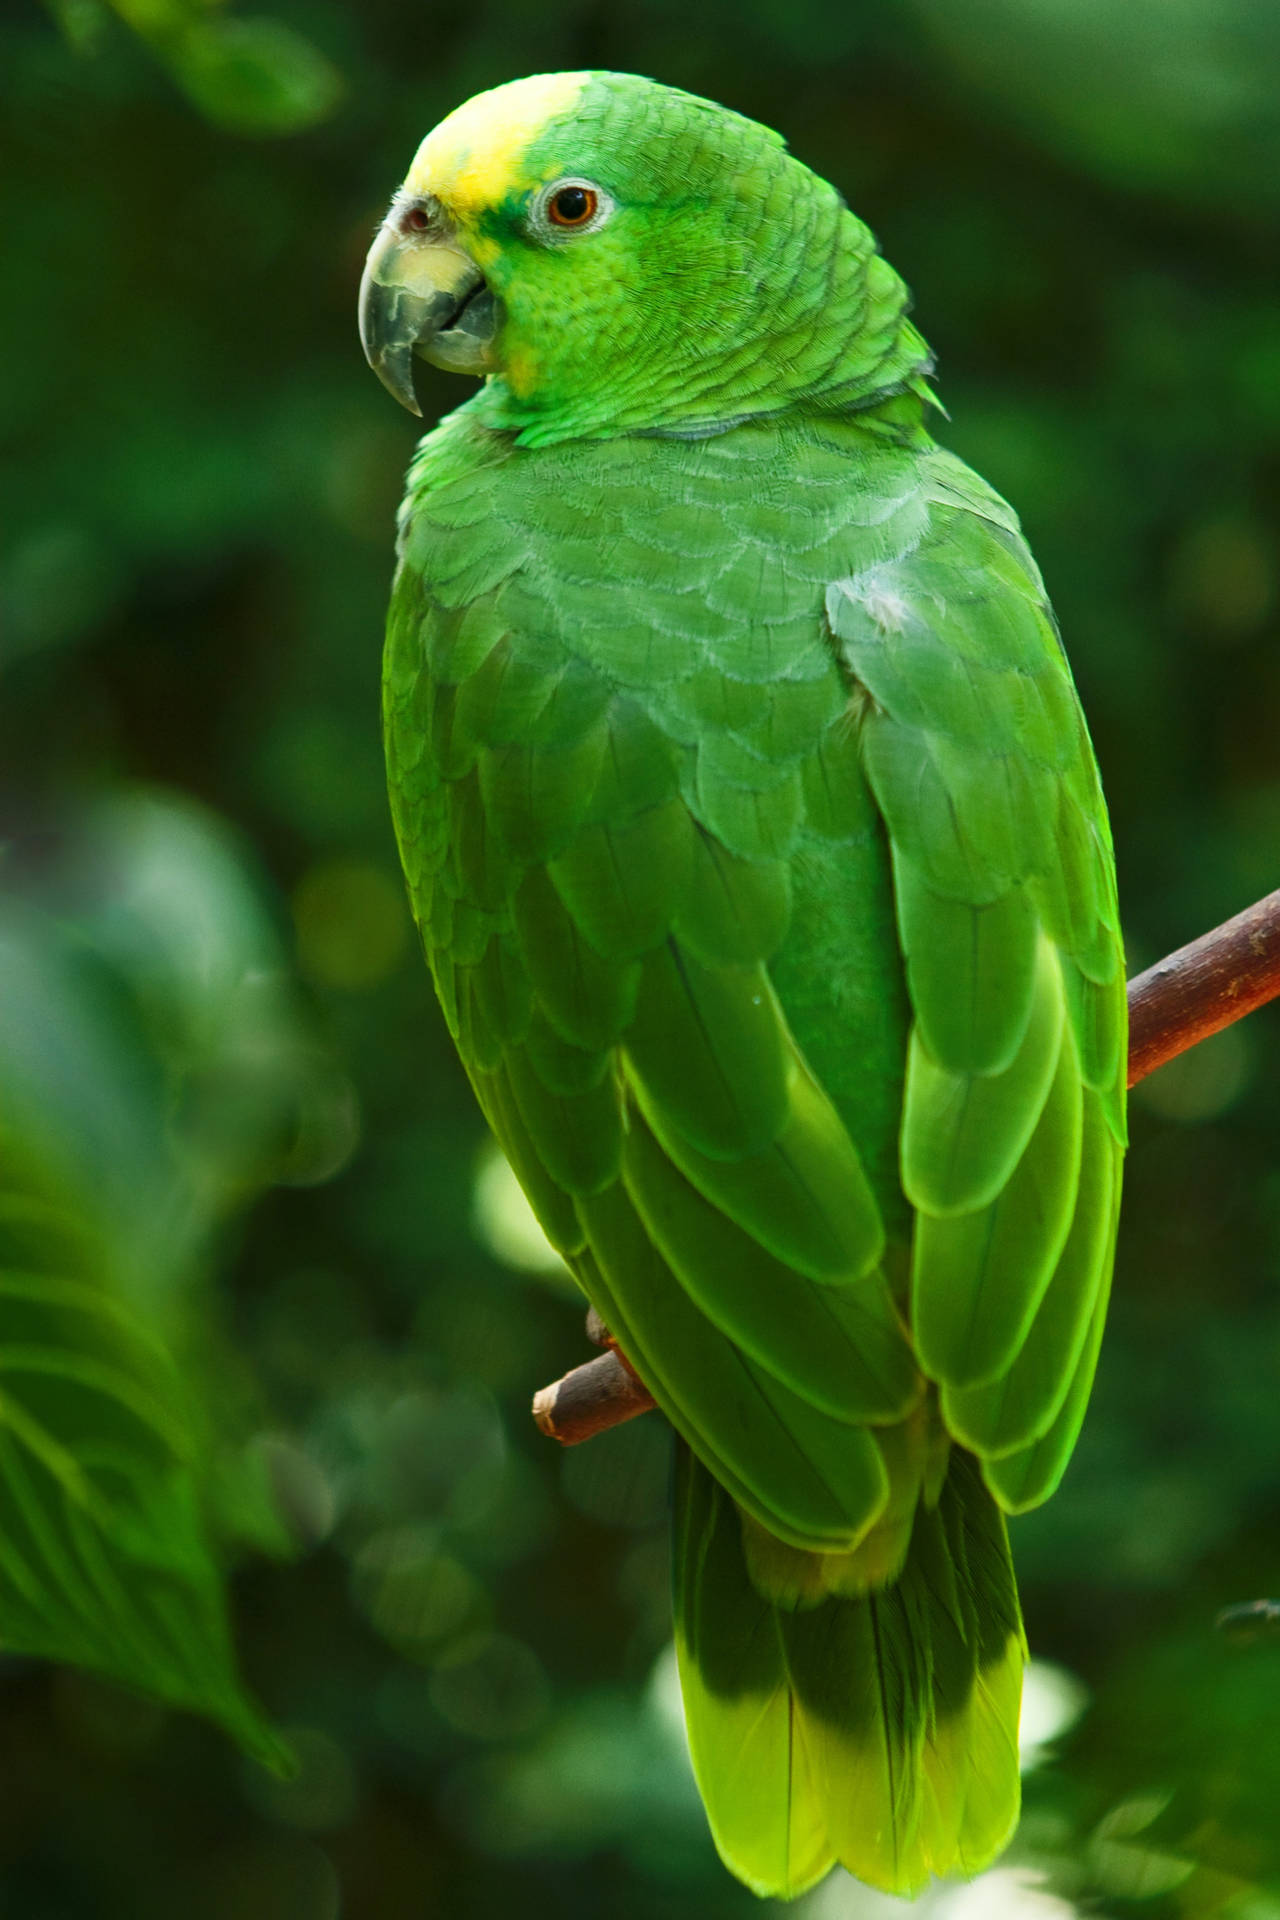 Caption: Vibrant Green Parrot in HD Quality Wallpaper